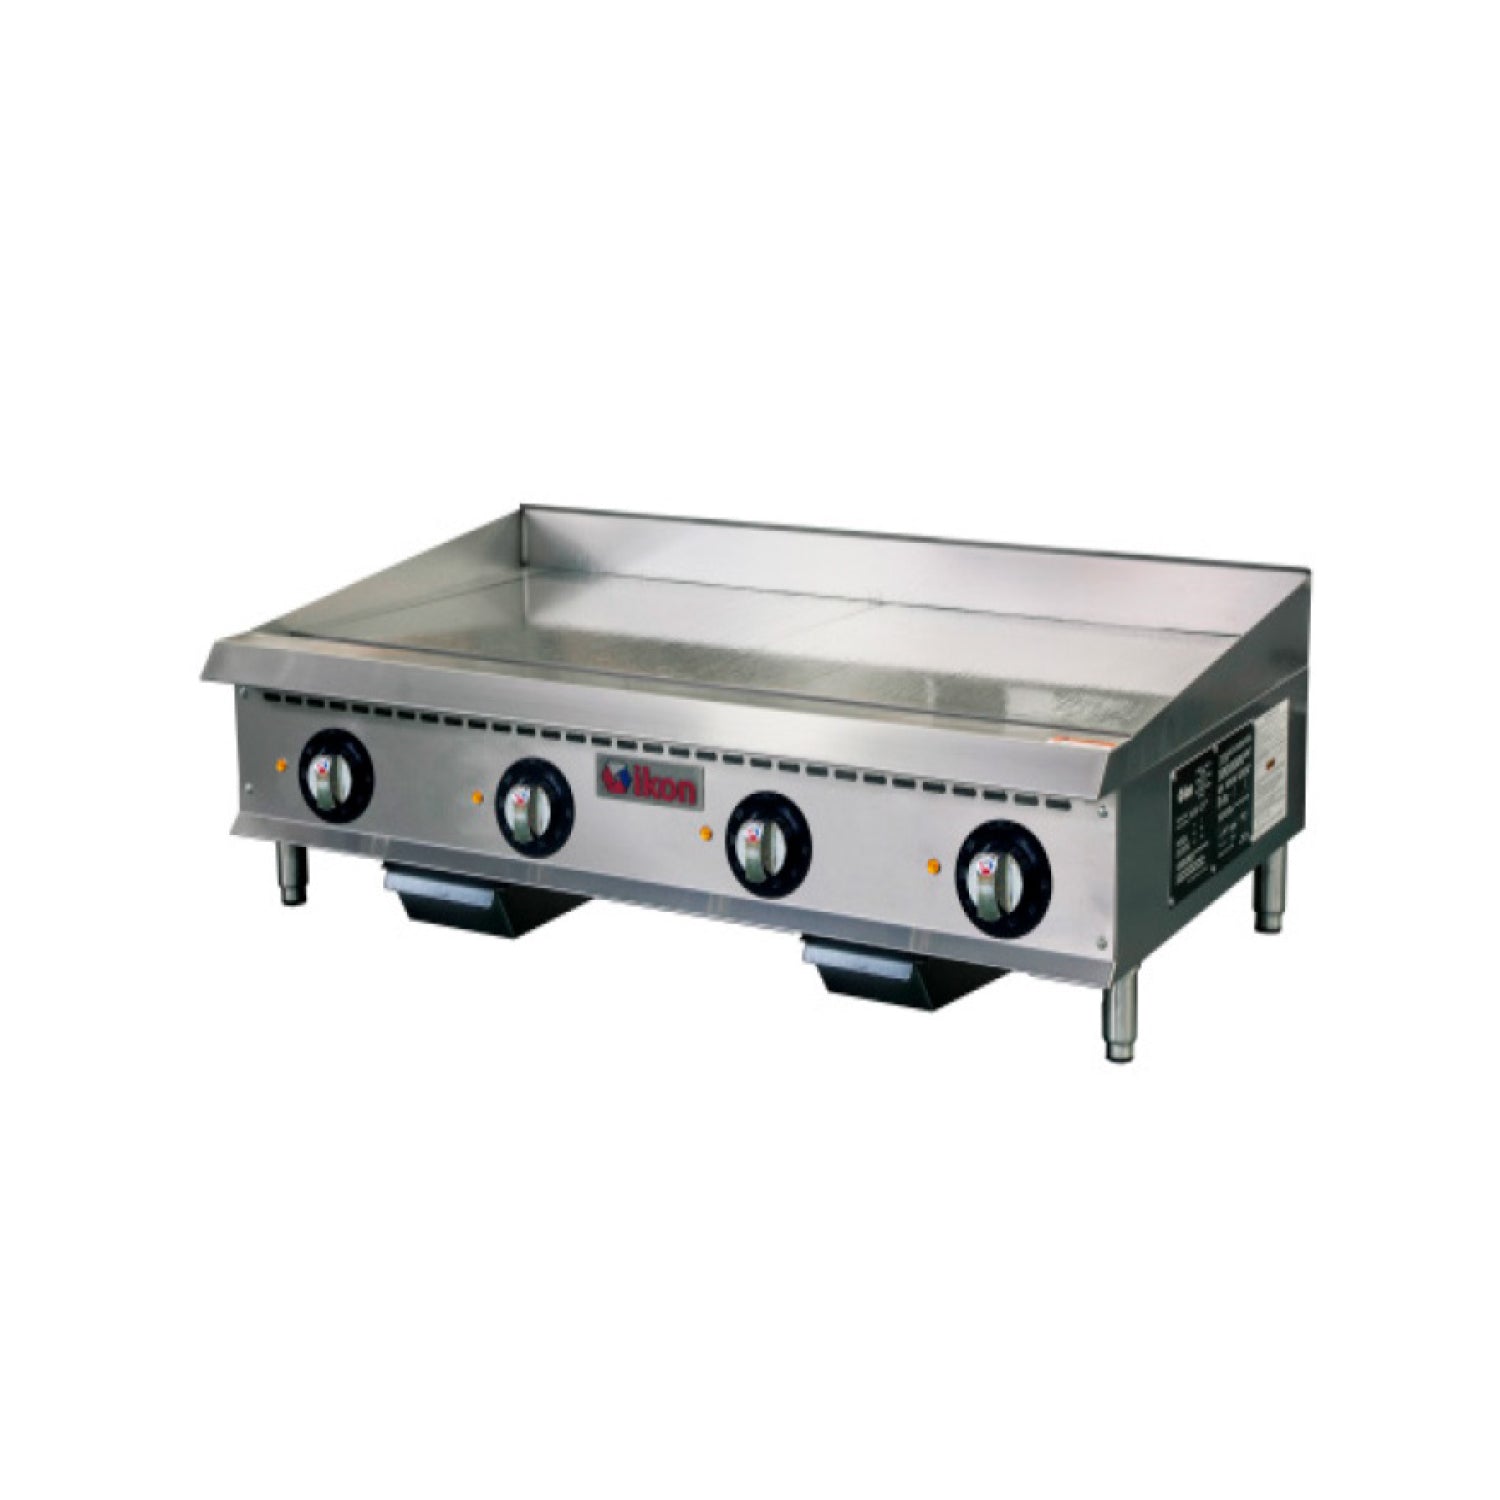 IKON - ITG-48E, 48" Electric Griddles With 16.0 KW Power